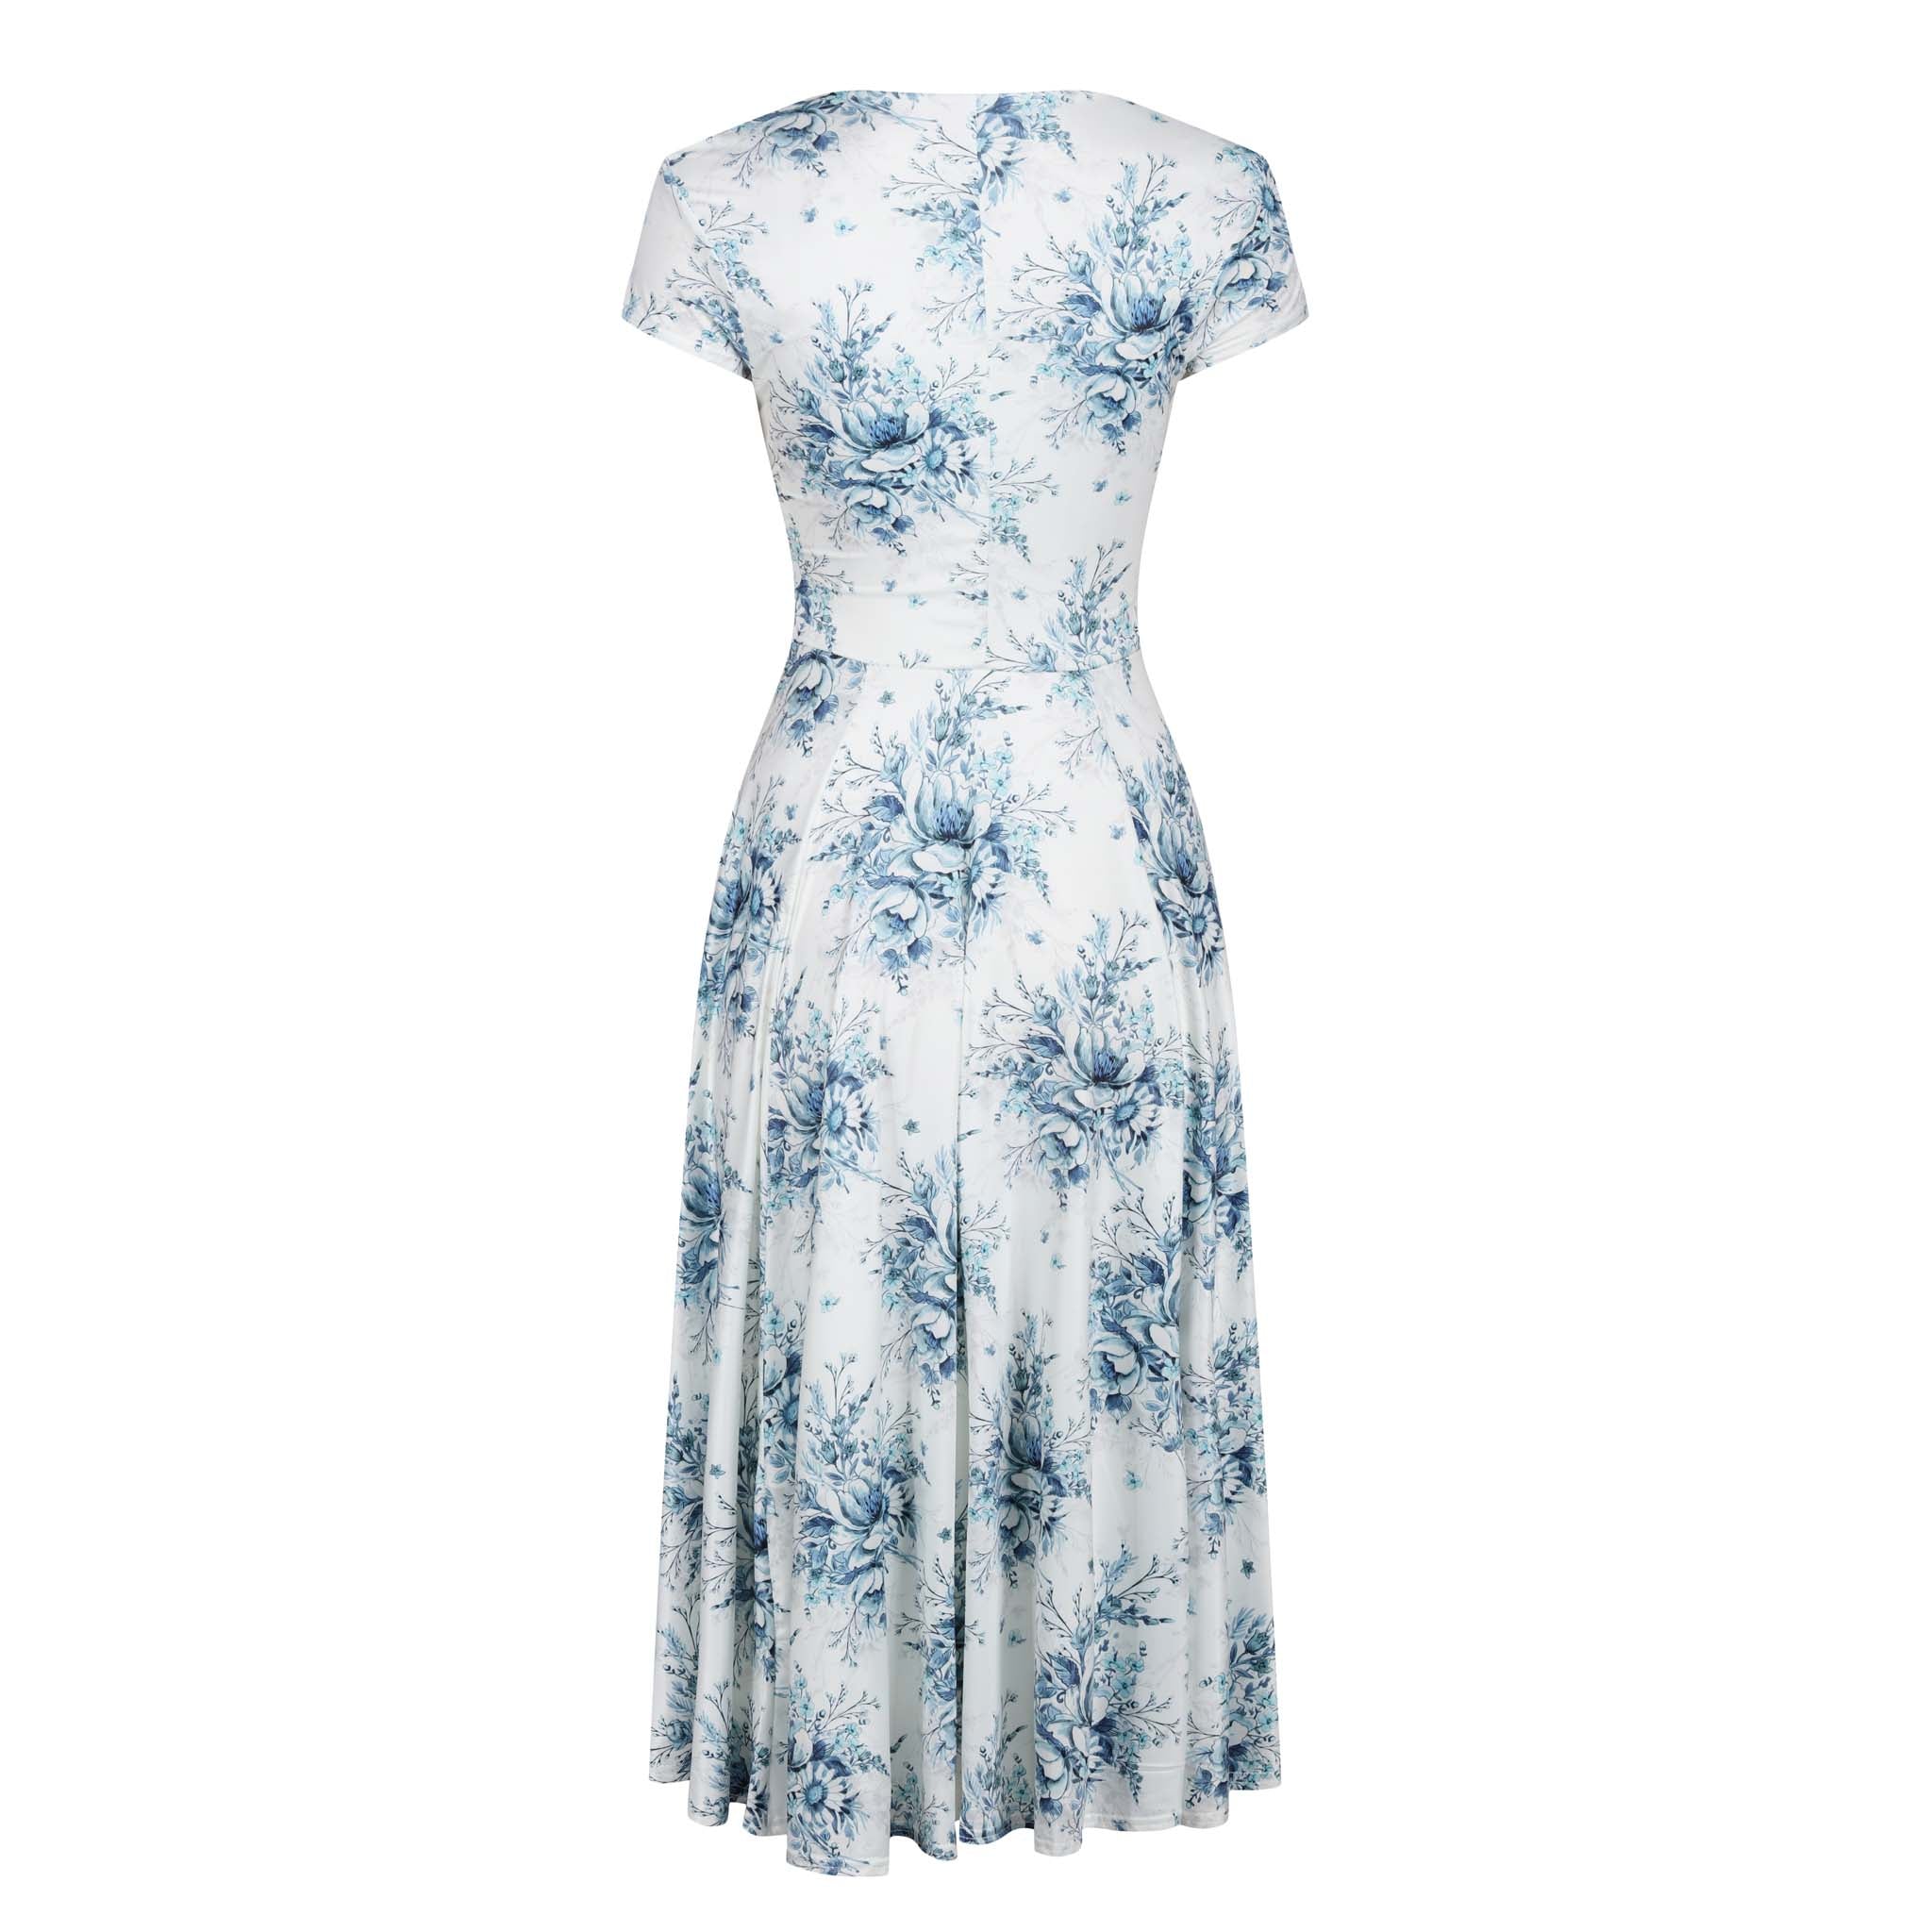 White And Blue Floral Print Cap Sleeve Crossover Top Swing Dress